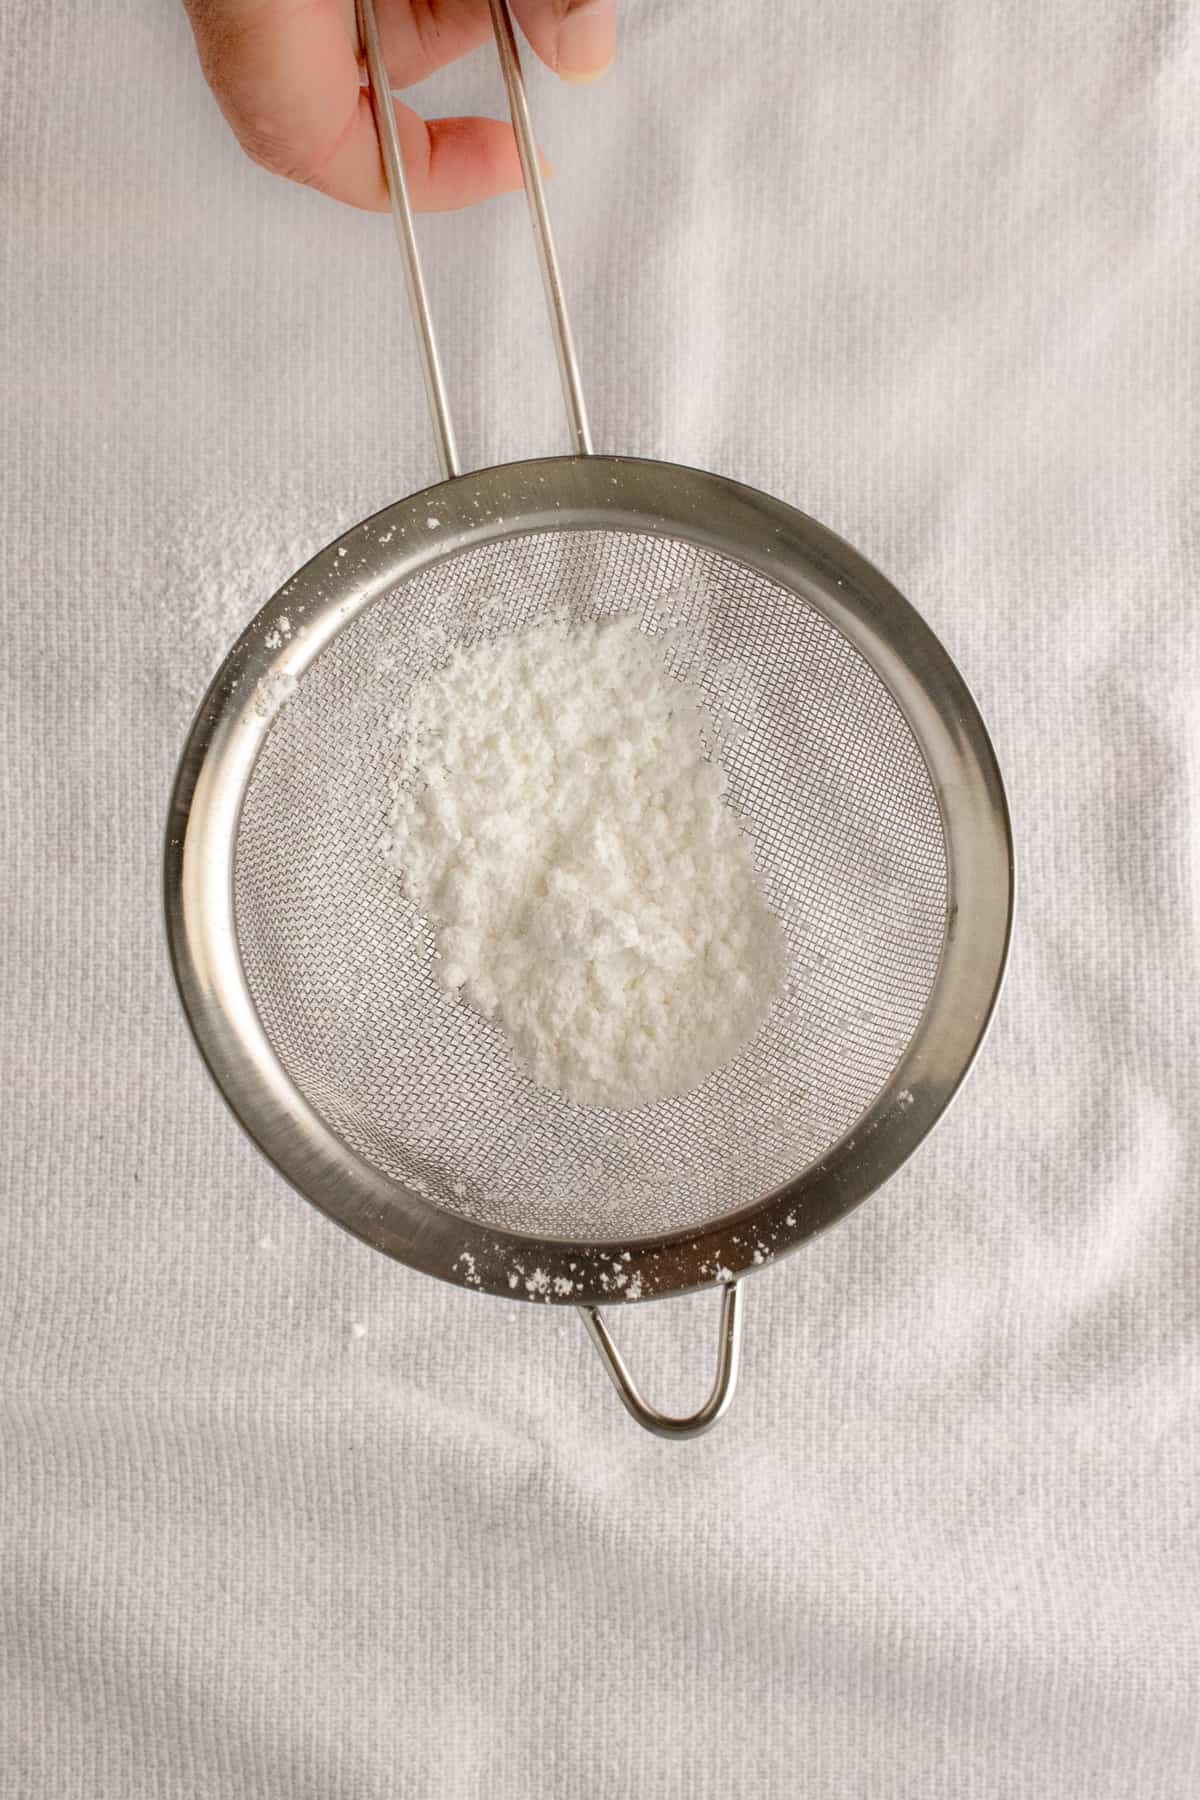 Powdered sugar being sifted on to kitchen towel